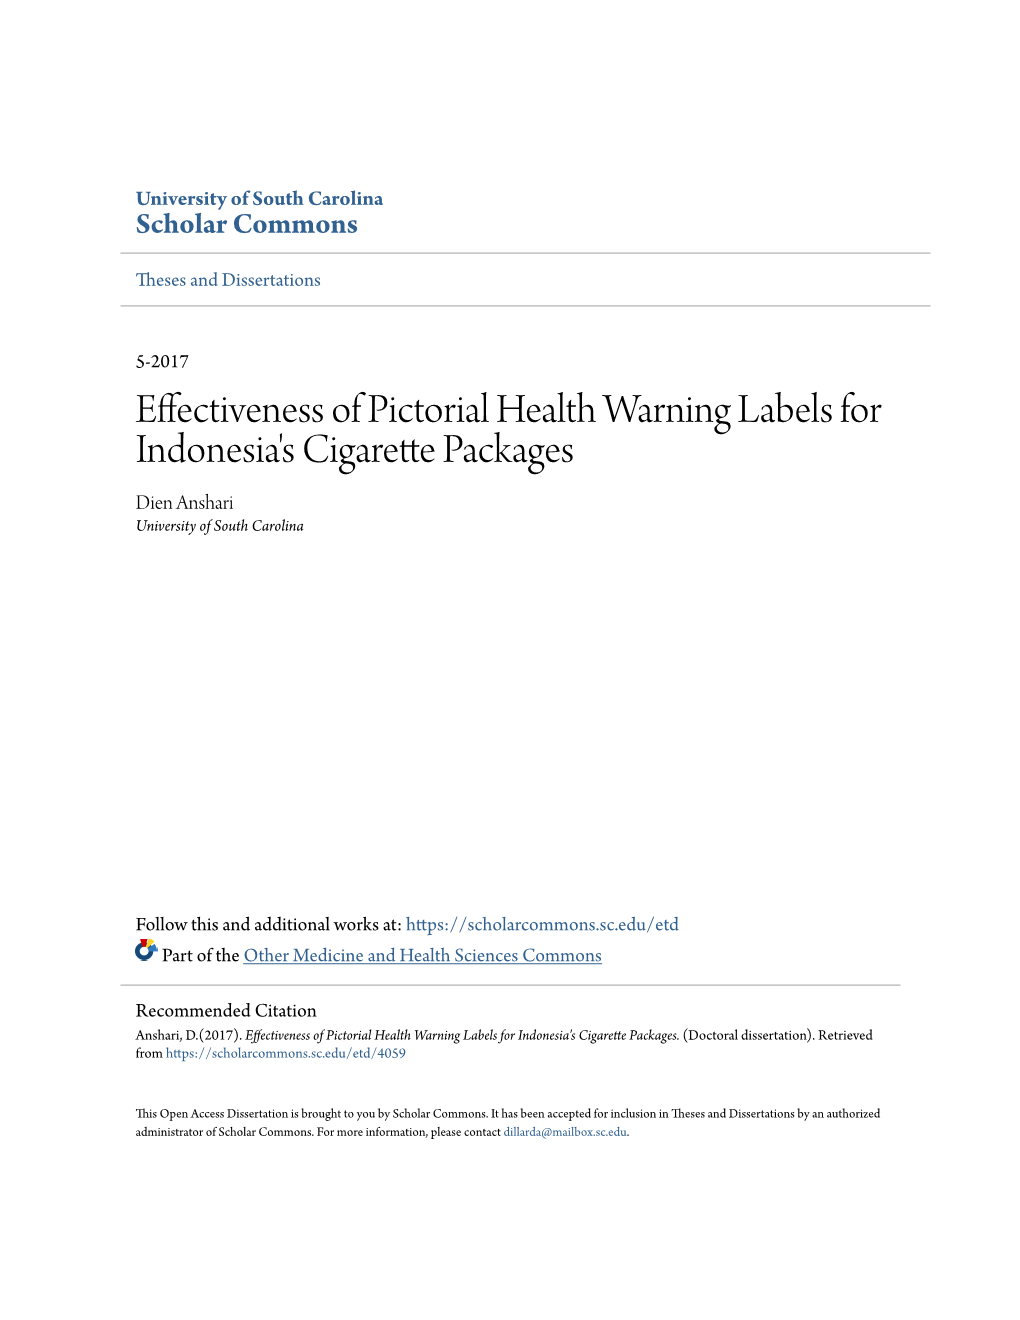 Effectiveness of Pictorial Health Warning Labels for Indonesia's Cigarette Packages Dien Anshari University of South Carolina